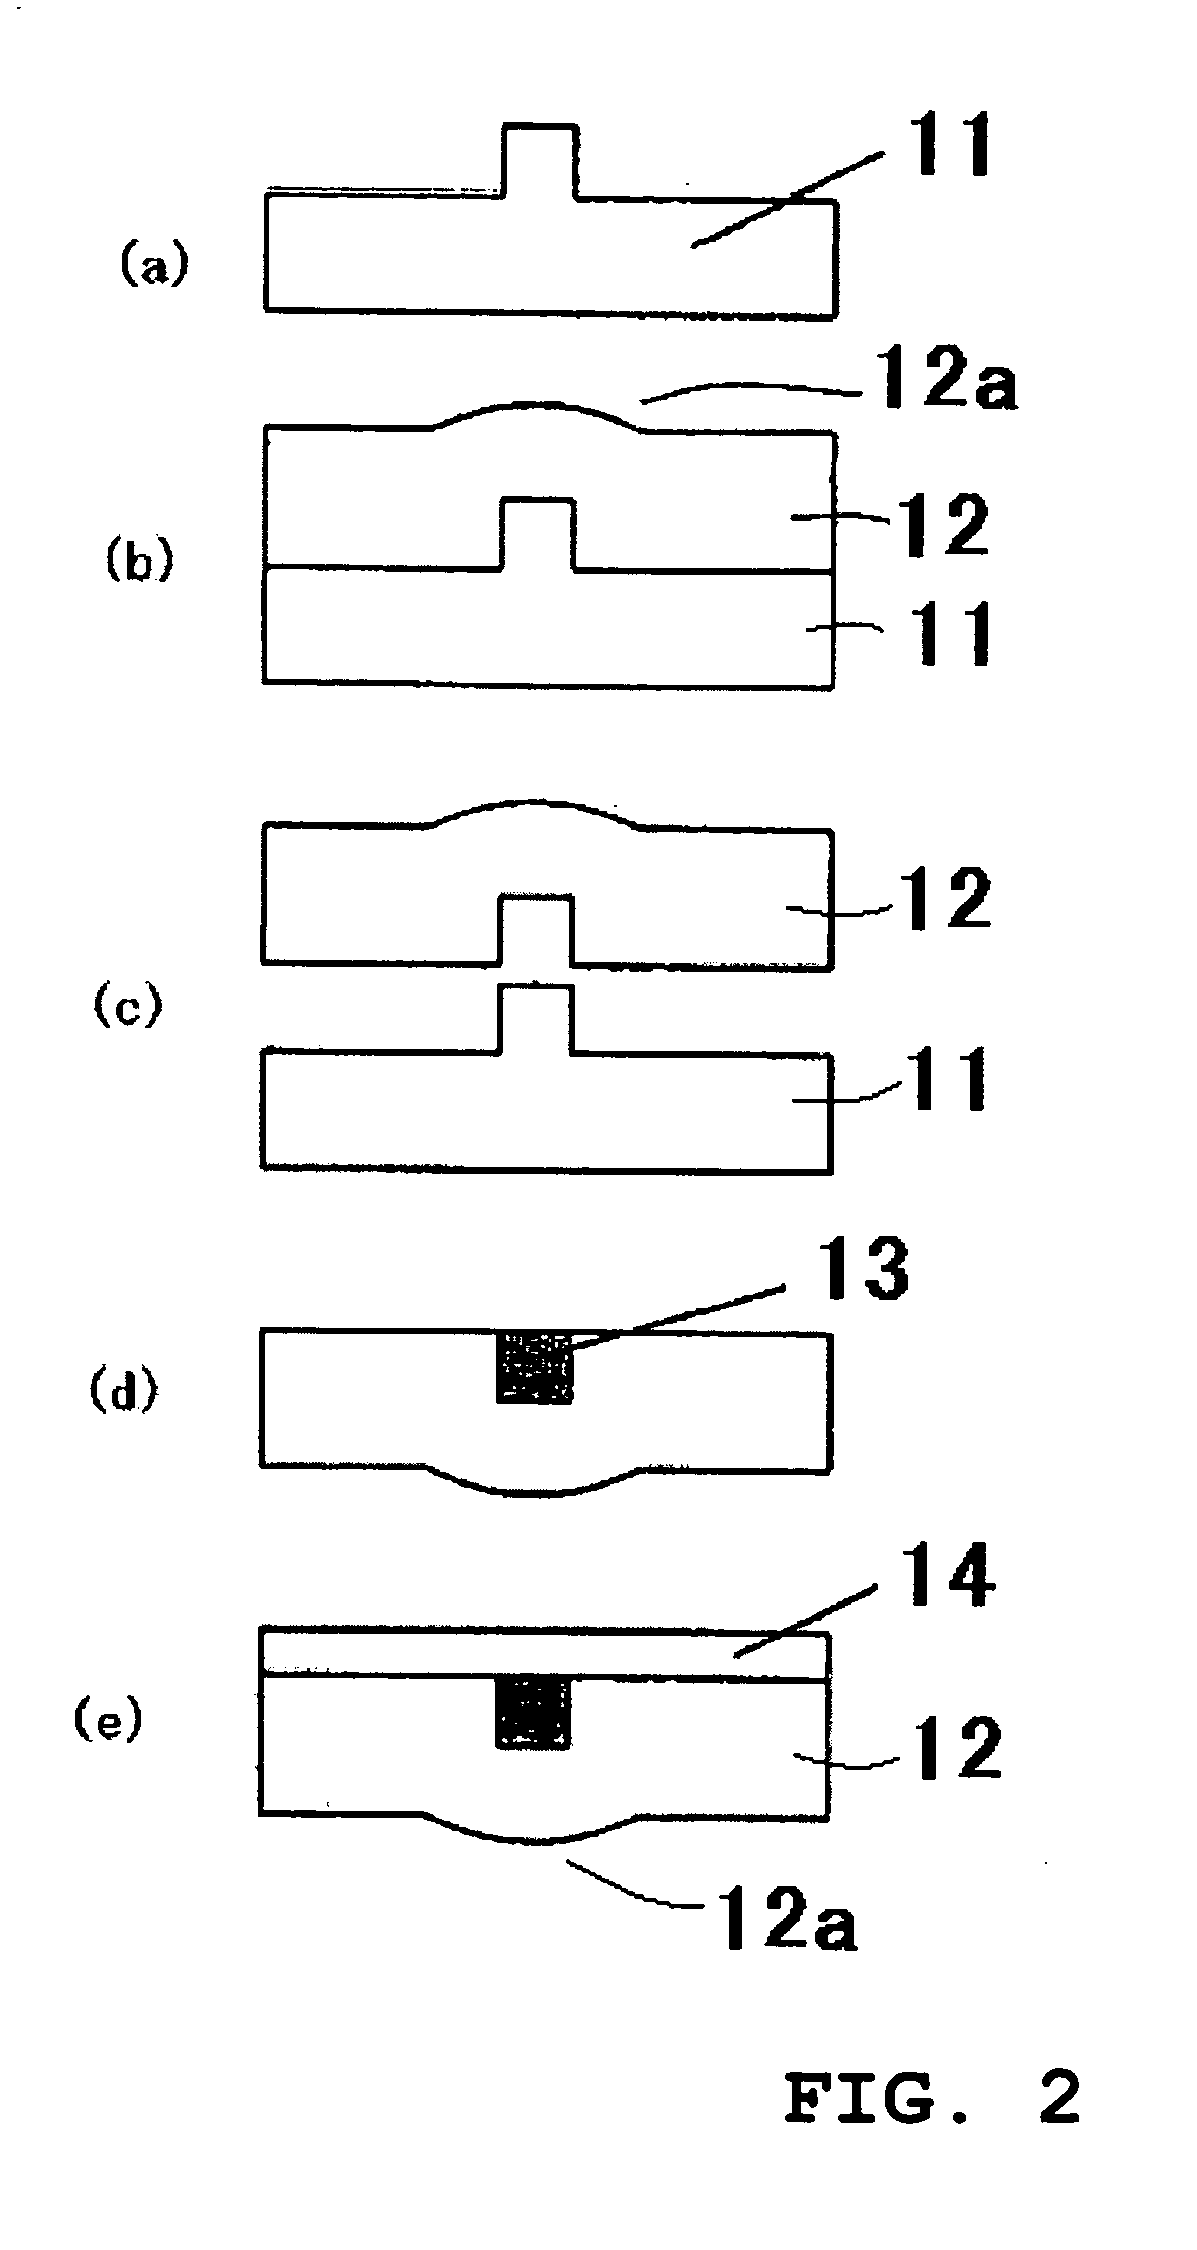 Optical waveguide having specular surface formed by laser beam machining